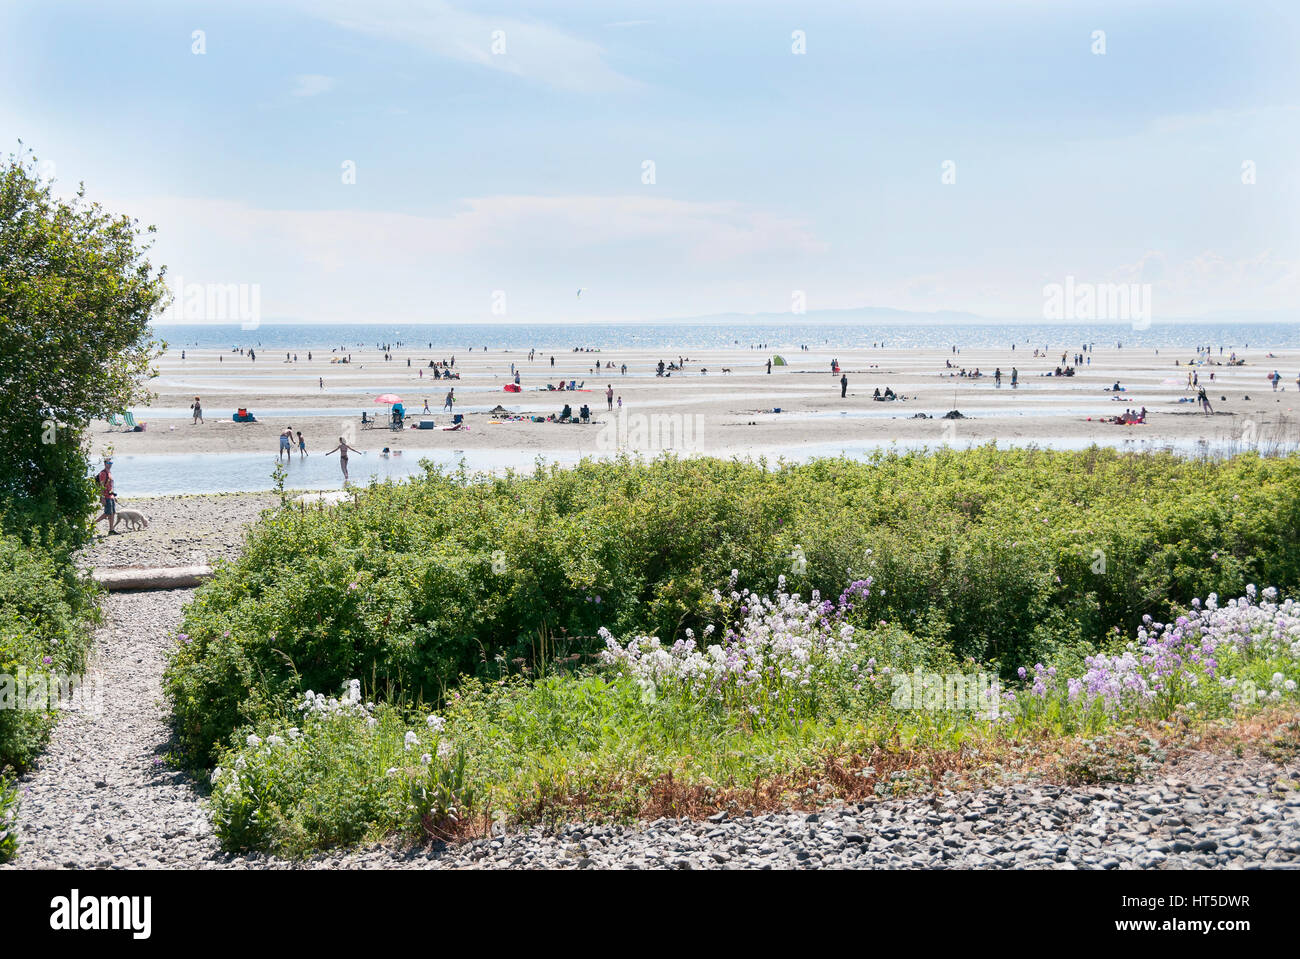 White Rock Beach landscape with people in British Columbia Canada Stock Photo